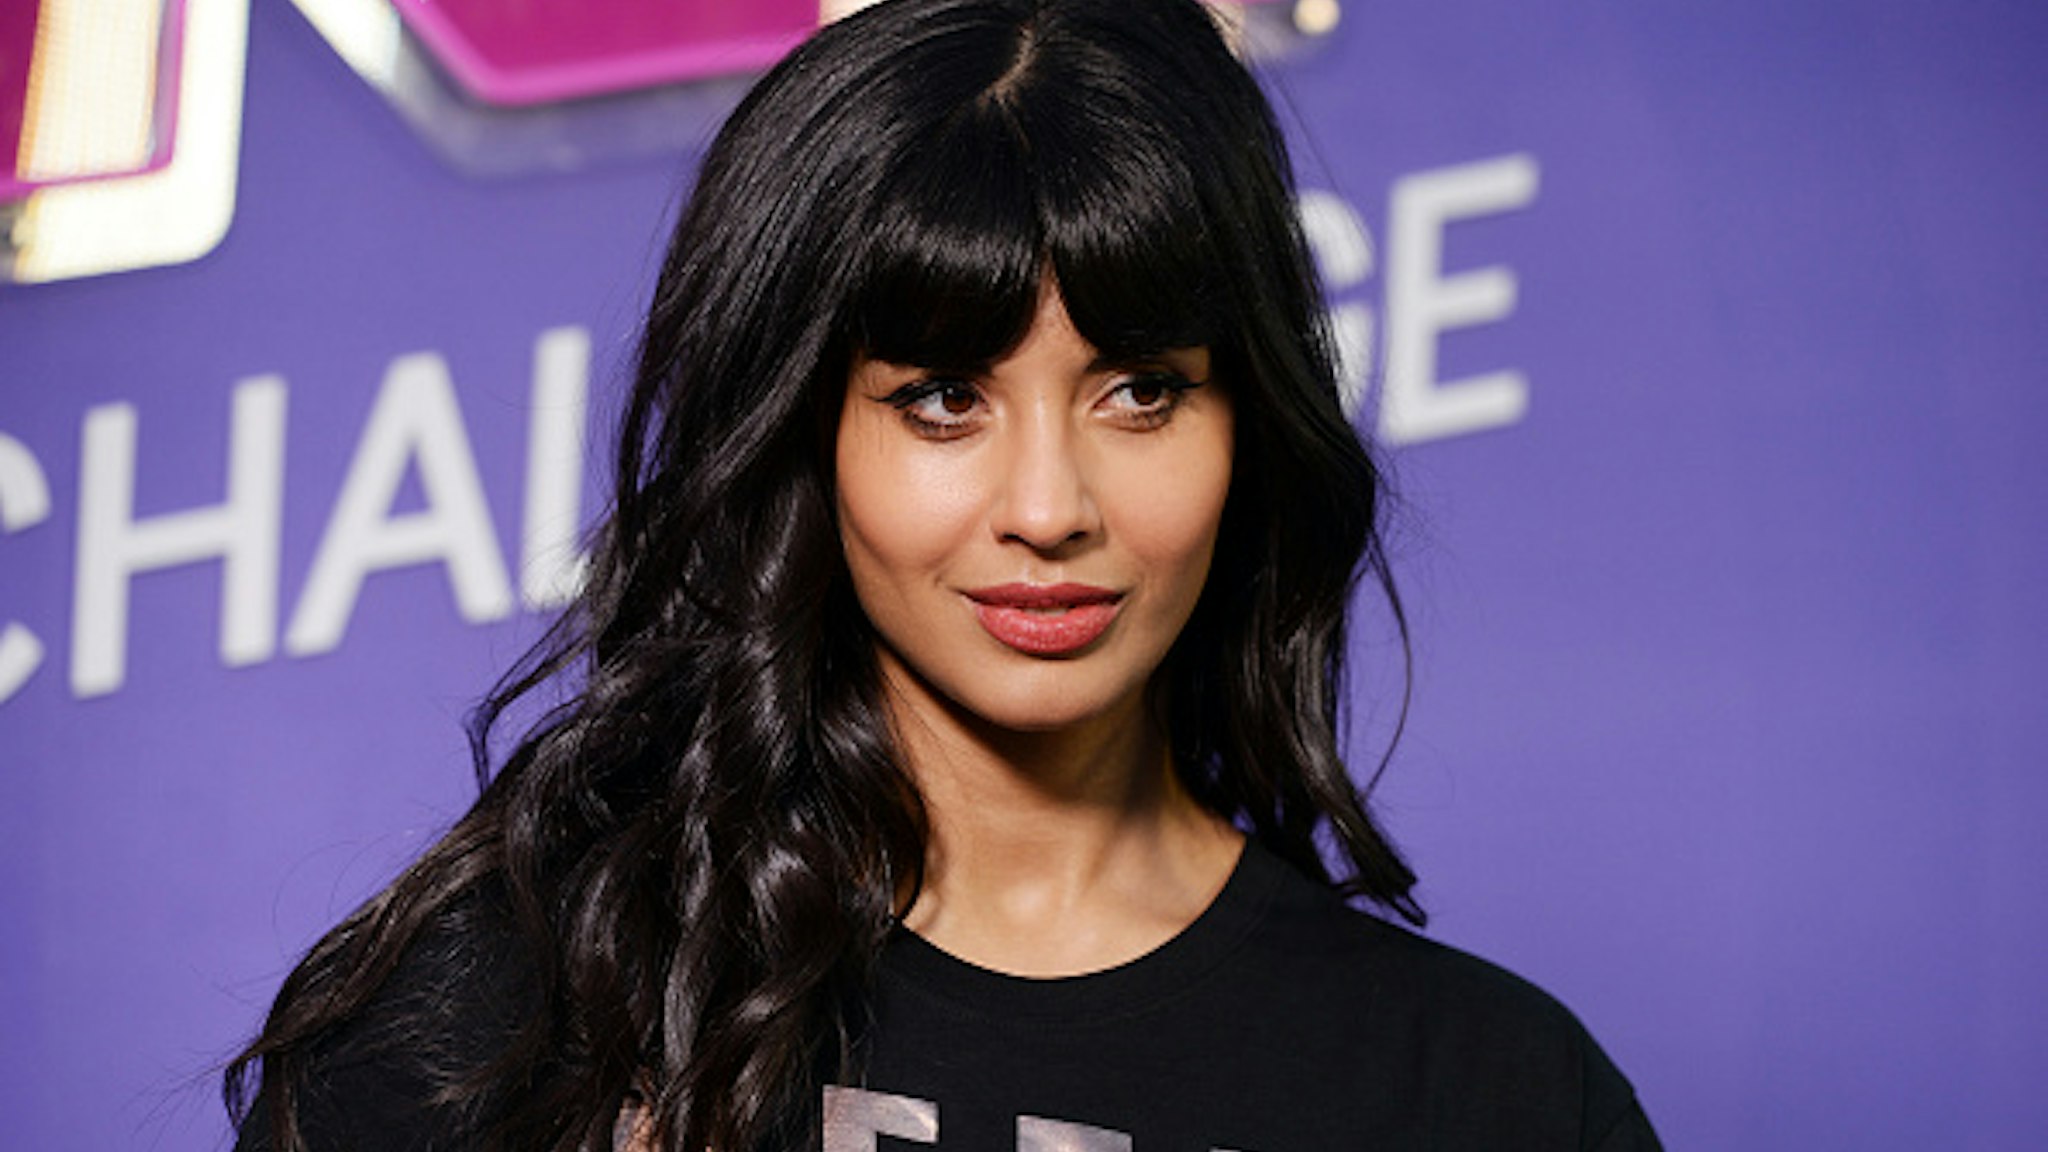 LOS ANGELES, CALIFORNIA - FEBRUARY 04: Actress Jameela Jamil attends the Jameela Jamil and Zumba "SELFish" Event at Casita Hollywood on February 04, 2020 in Los Angeles, California.